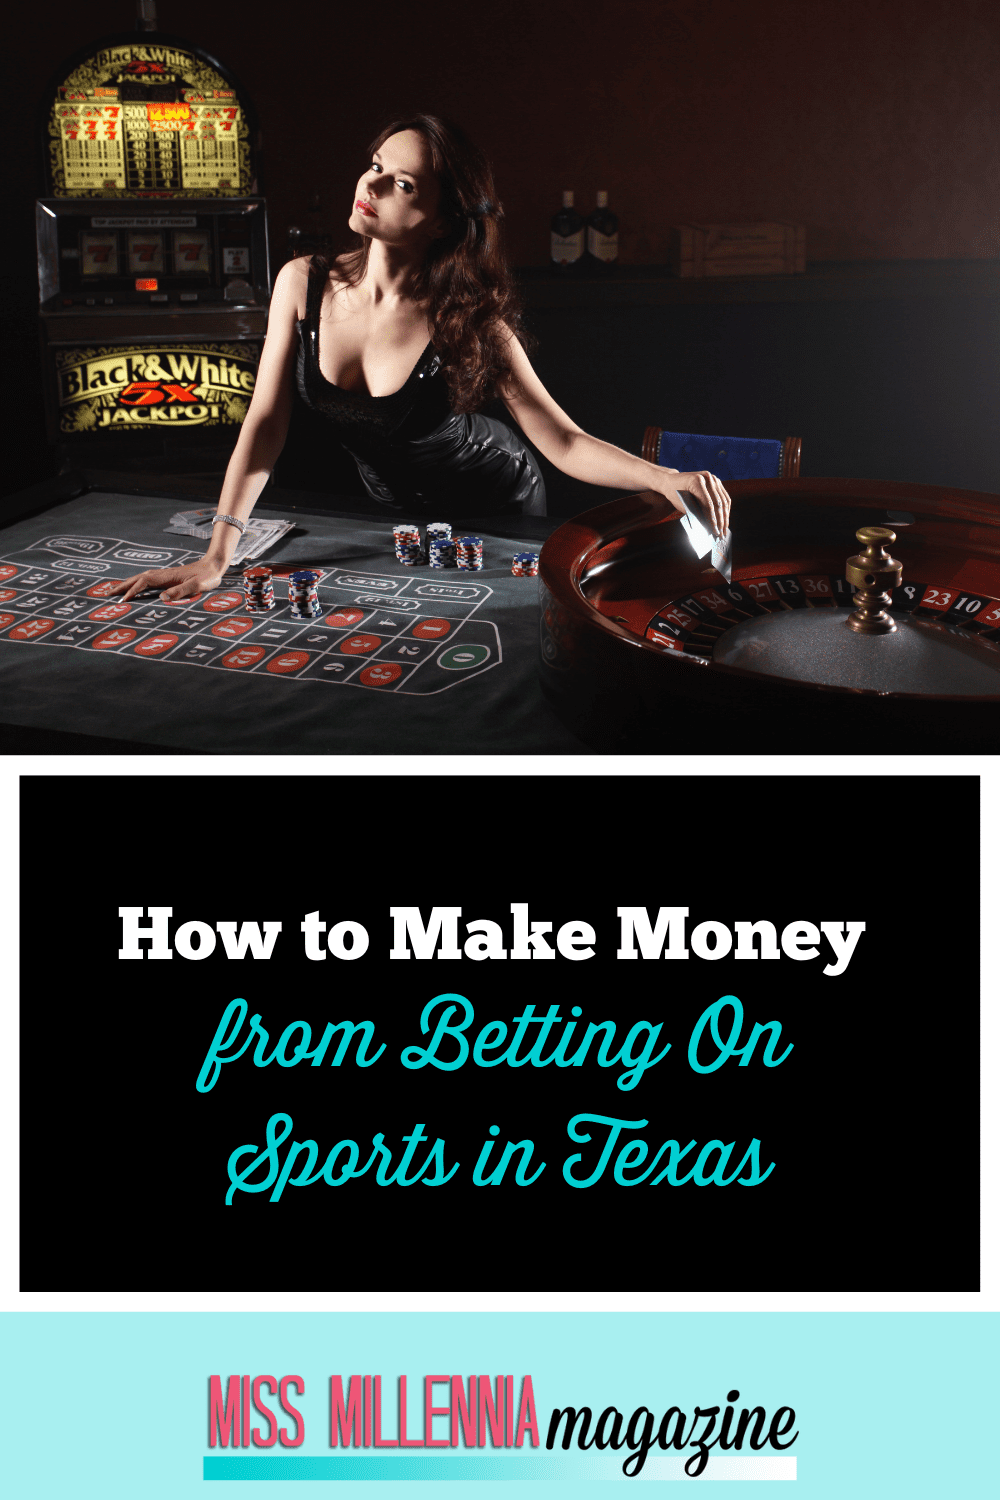 How to Make Money from Betting On Sports in Texas